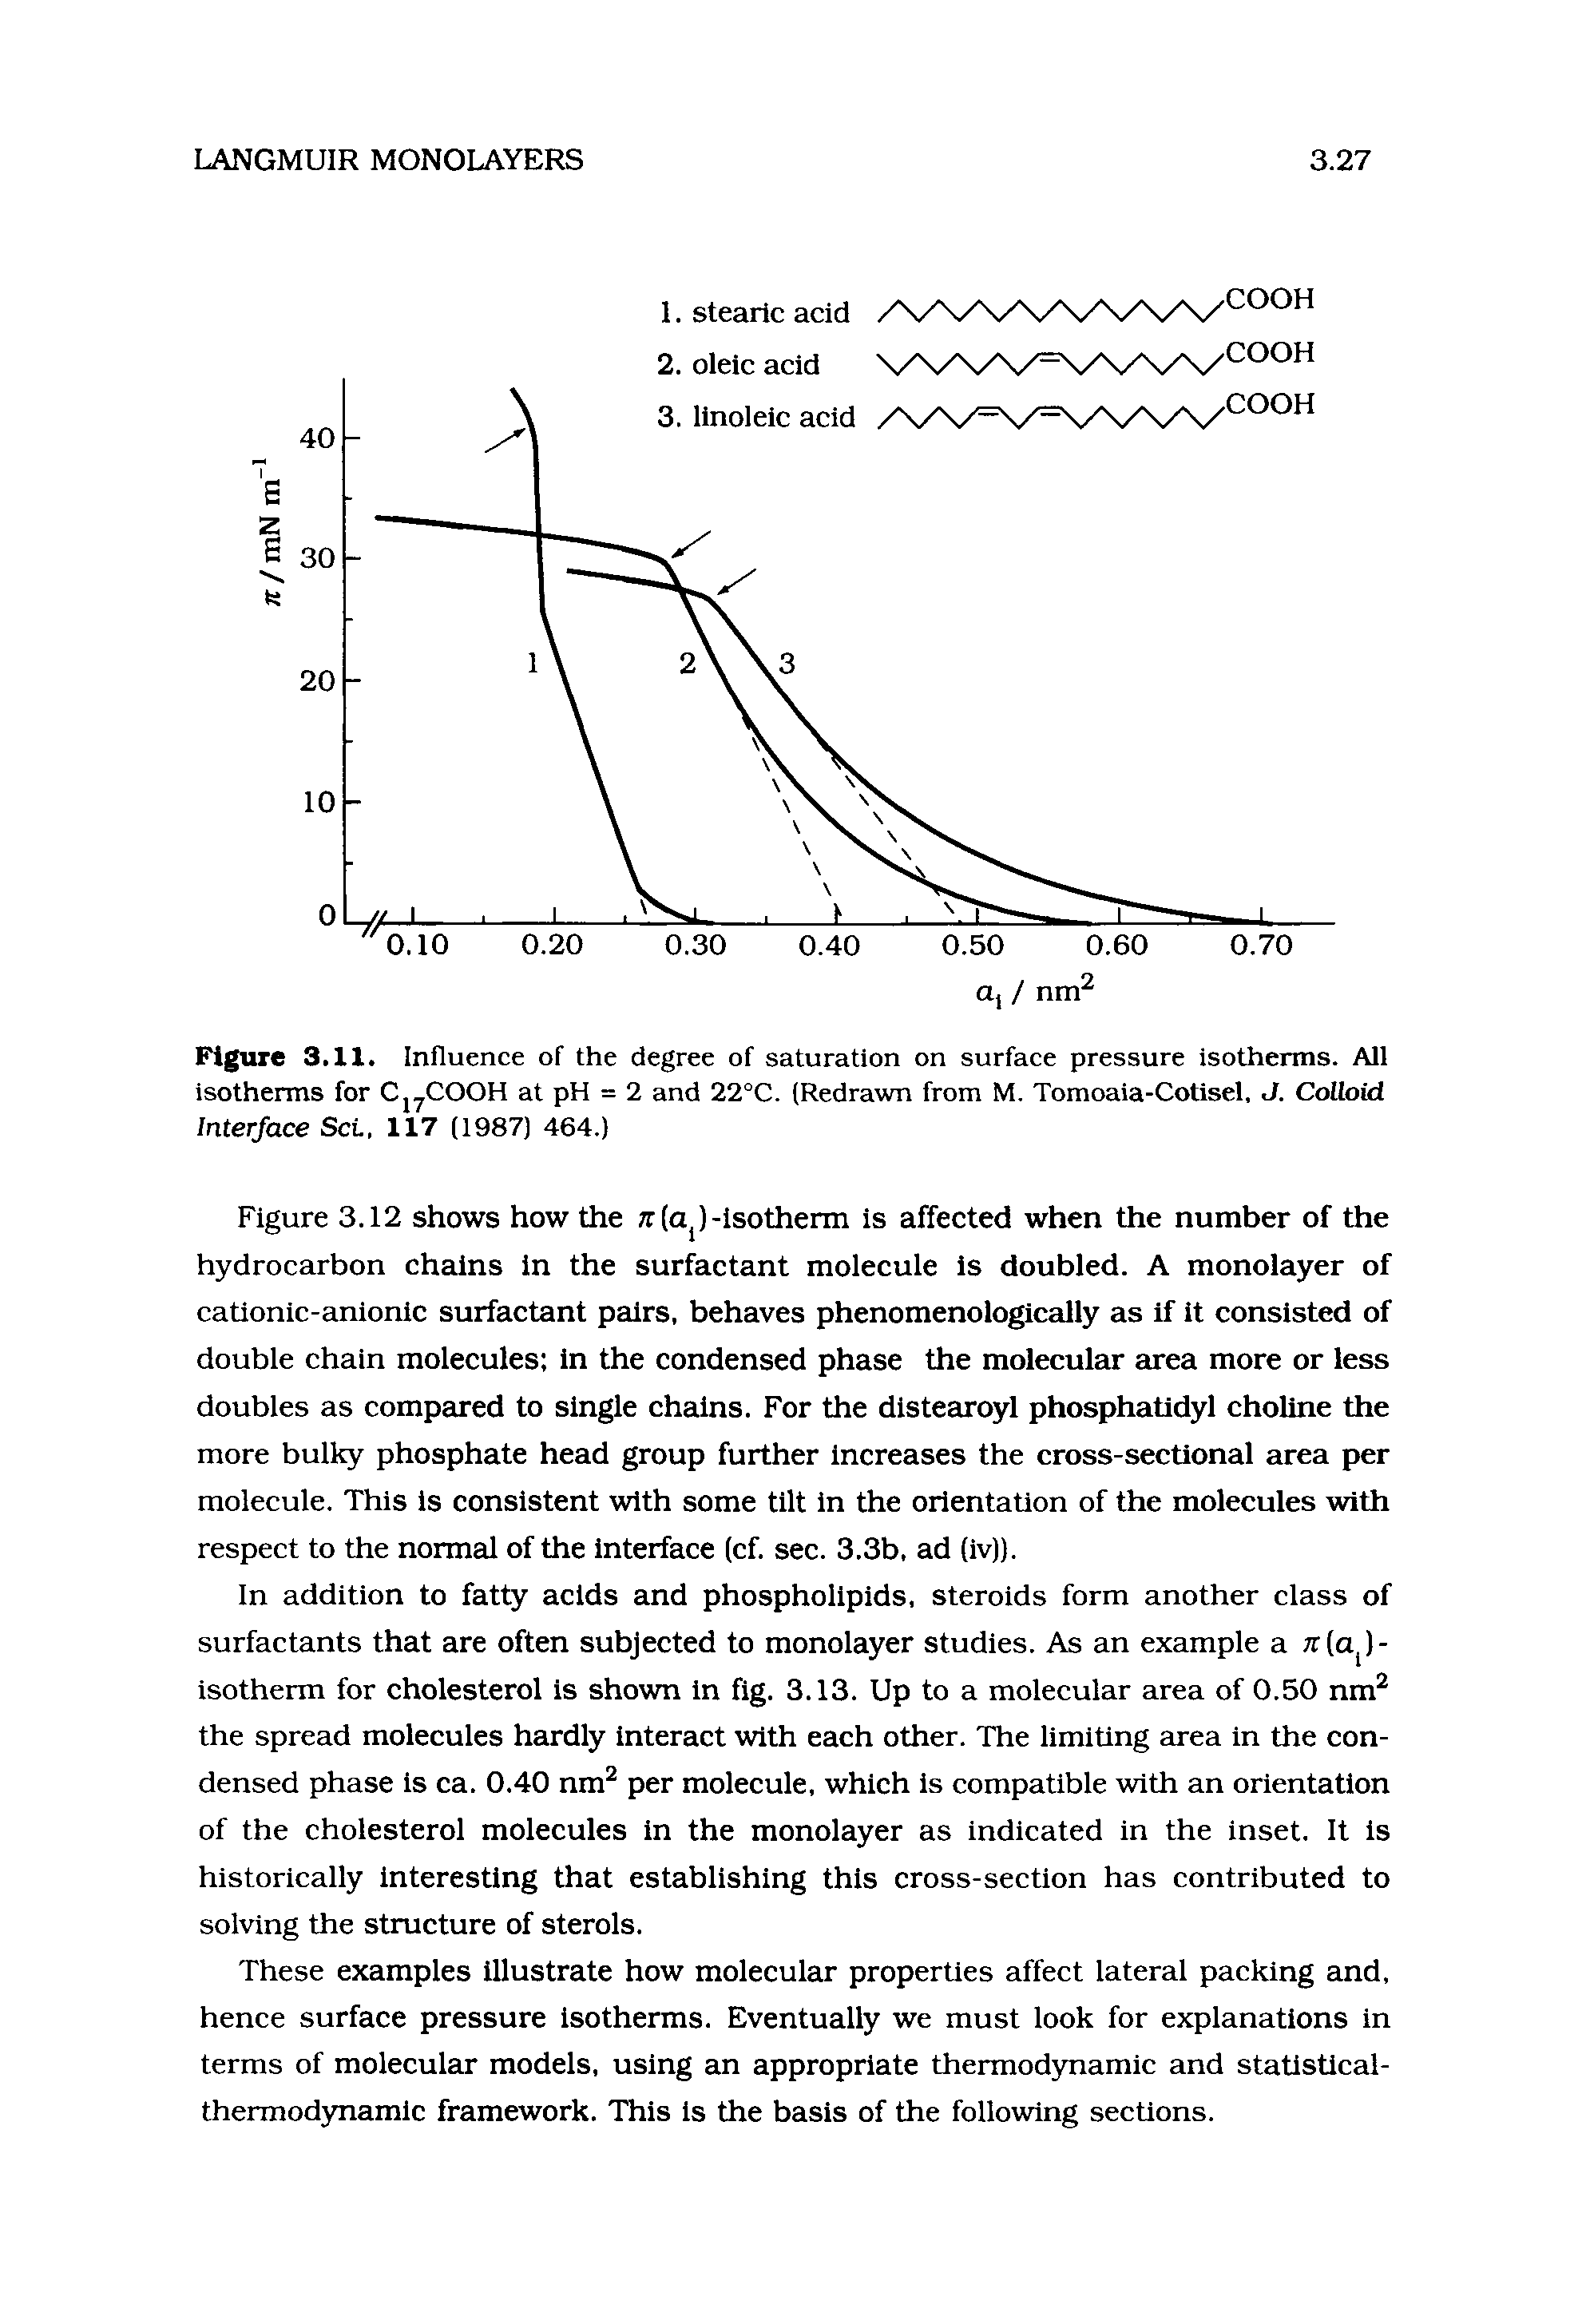 Figure 3.11. Influence of the degree of saturation on surface pressure isotherms. All isotherms for Cj COOH at pH = 2 and 22°C. (Redrawn from M. Tomoaia-Cotisel, J. Colloid Interface Set, 117 (1987) 464.)...